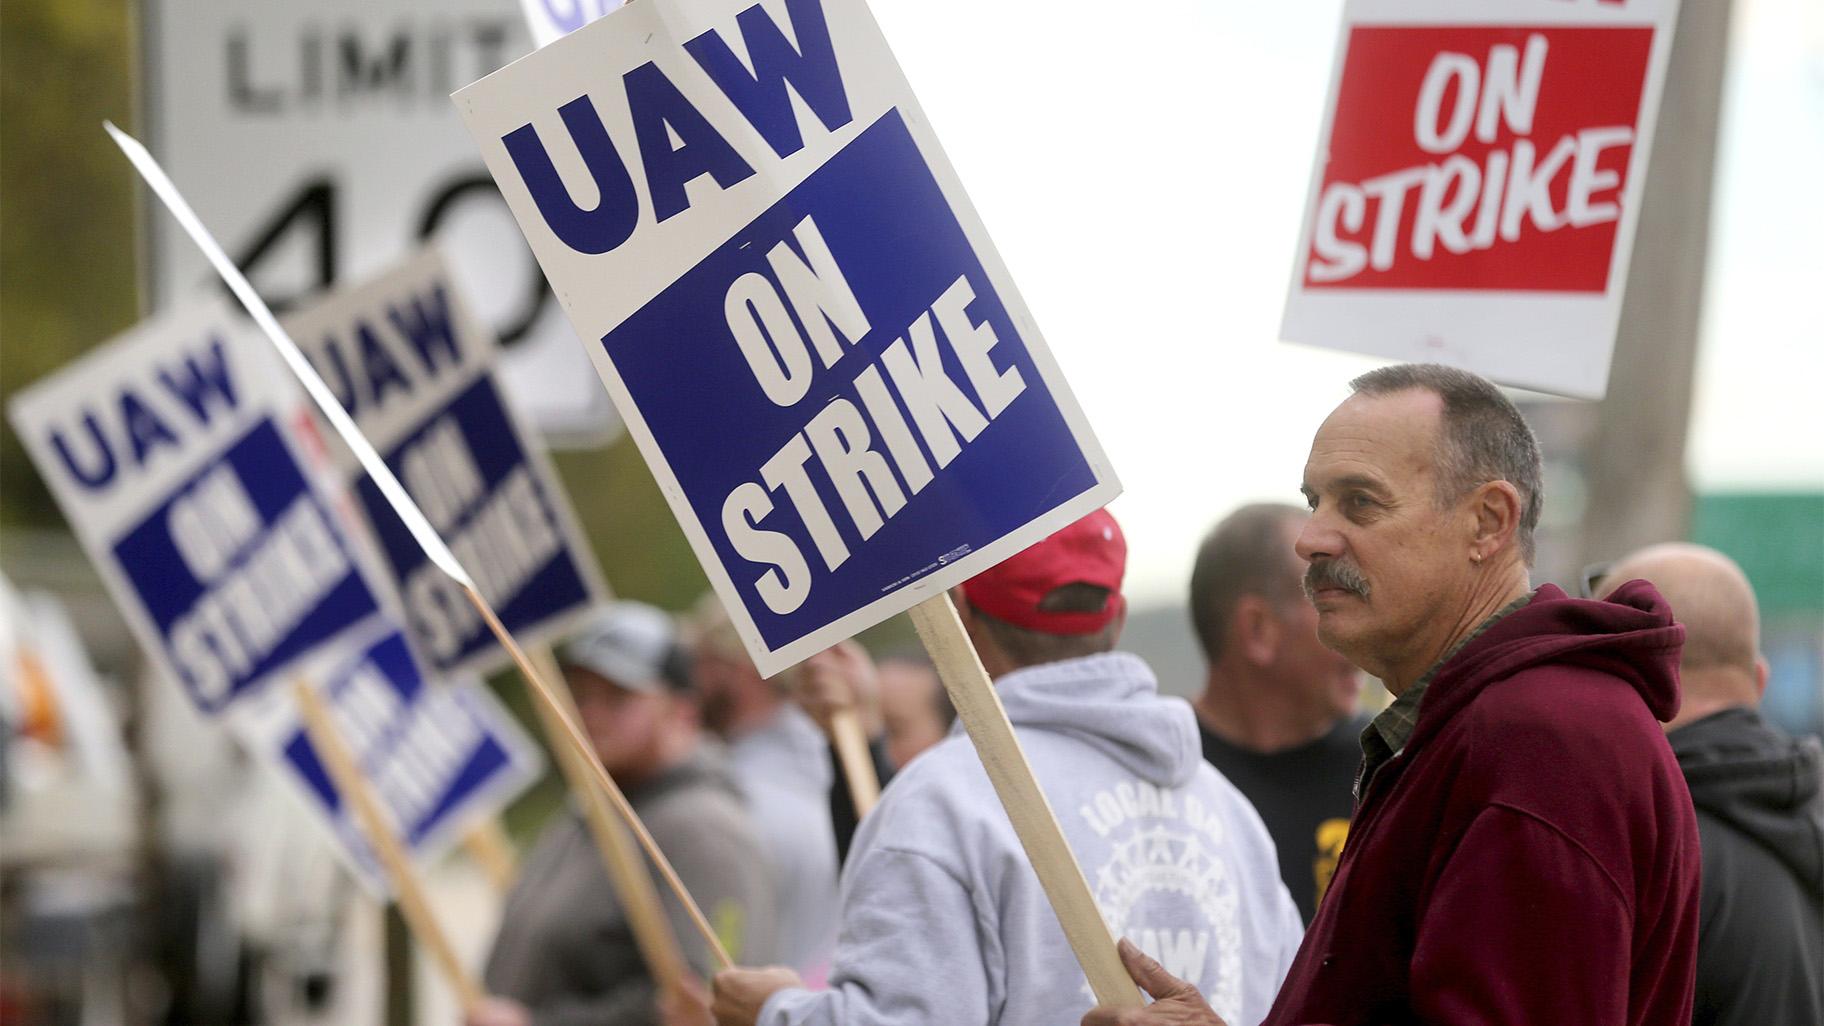 John Deere Dubuque Works union employee Steve Thor pickets outside UAW Local 94 in Dubuque, Iowa, on Thursday, Oct. 14, 2021. (Jessica Reilly / Telegraph Herald via AP)